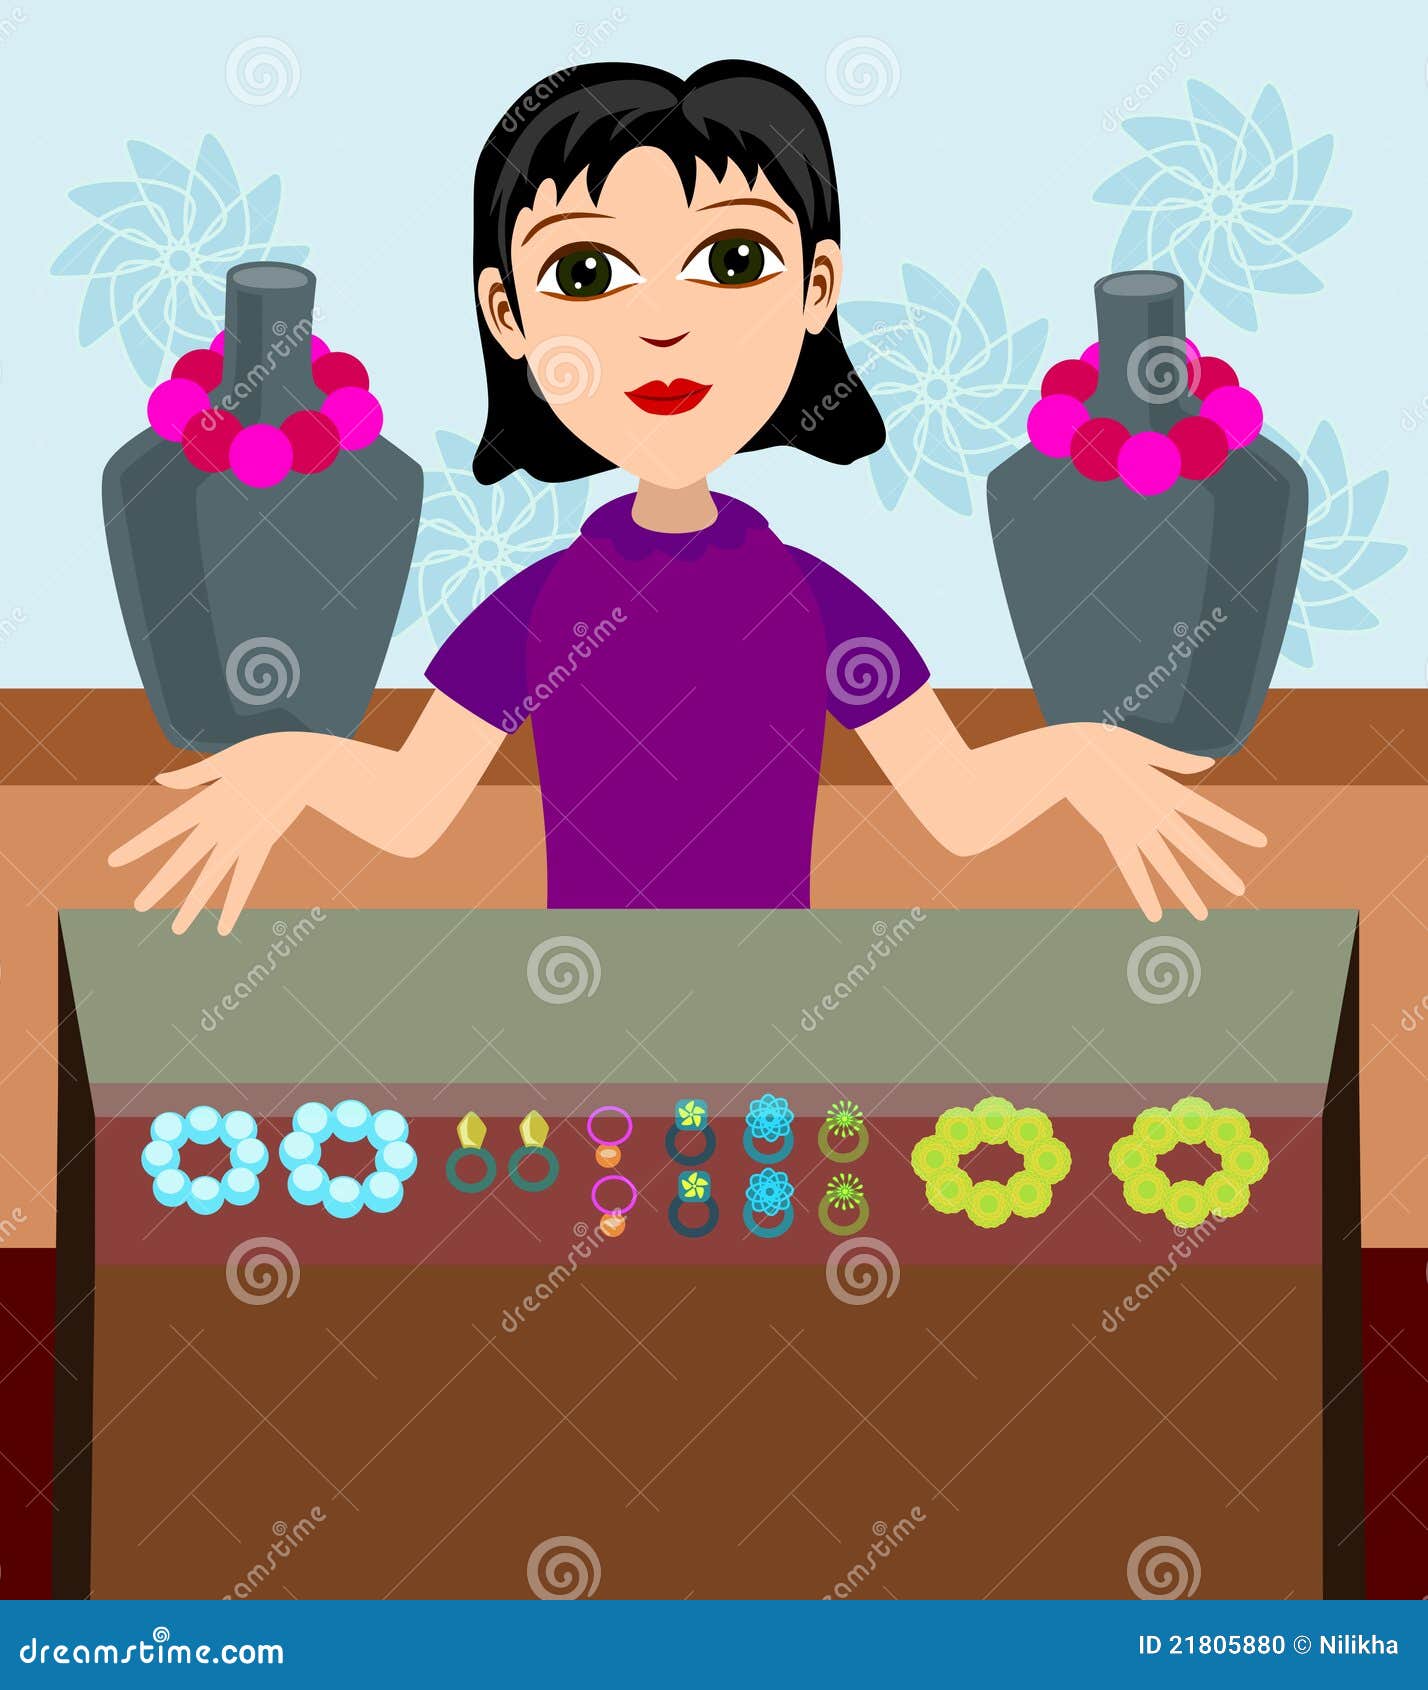 jewelry shopping clipart - photo #9